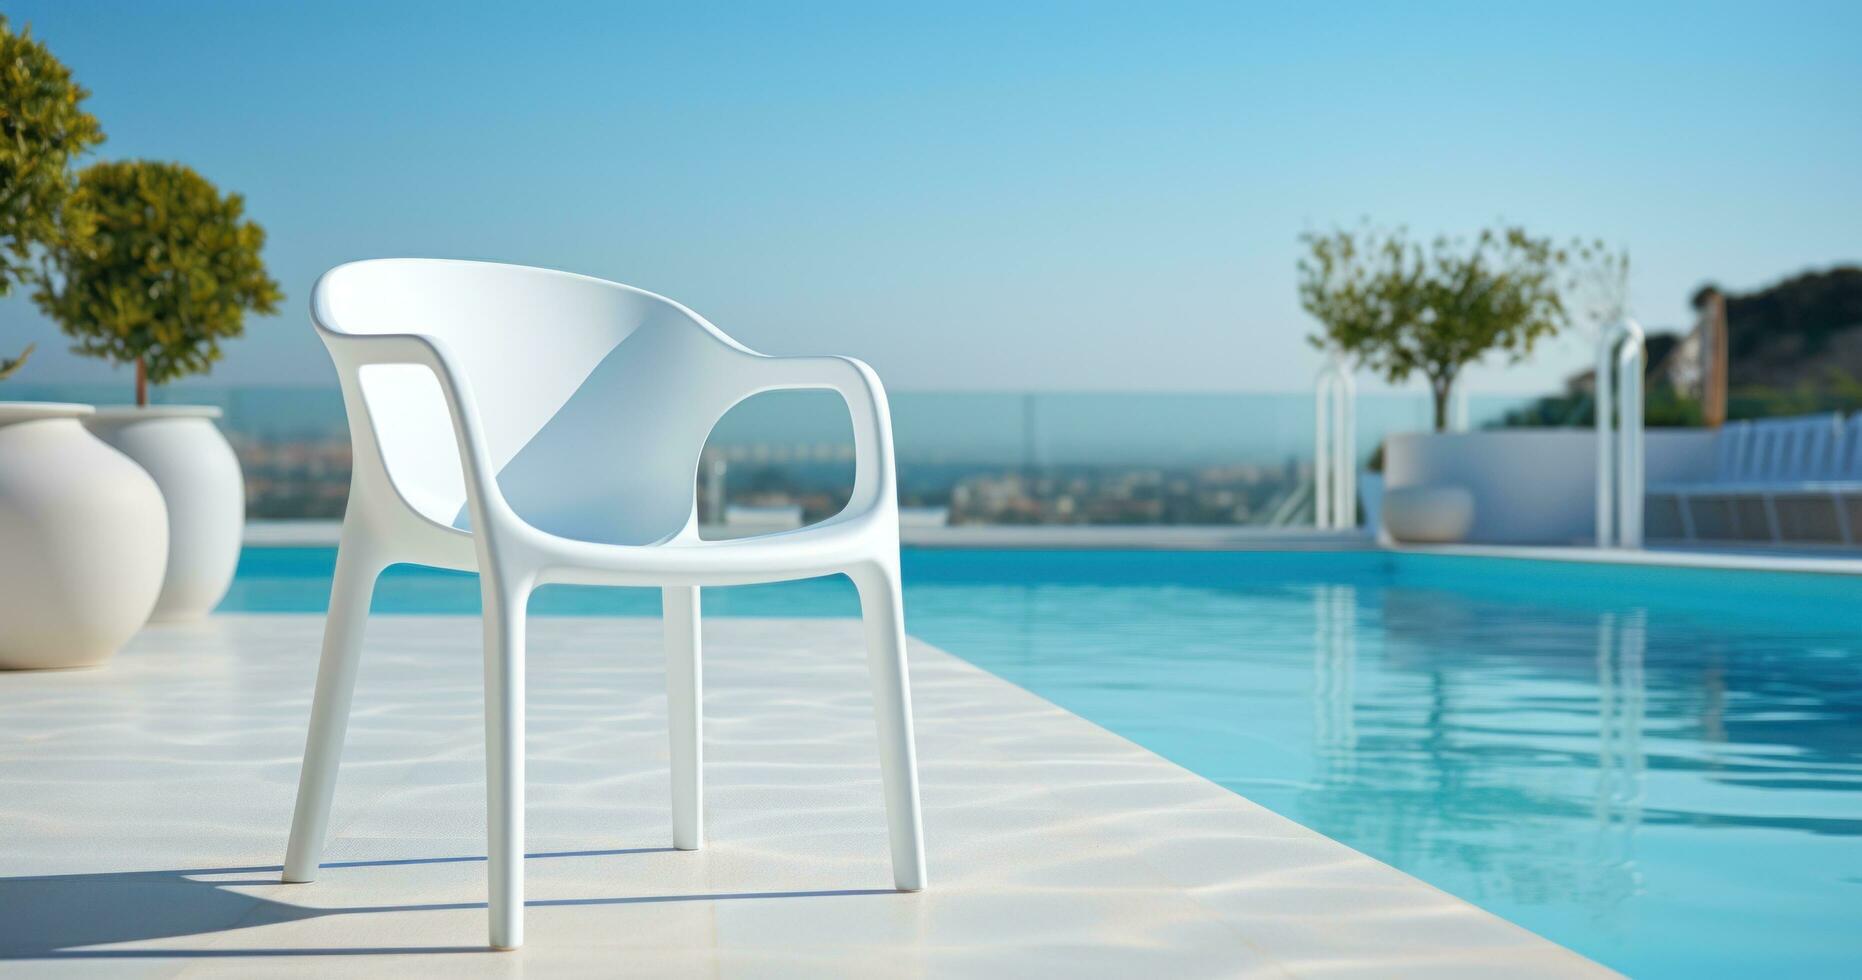 AI generated a white pool and some chairs outside with a blue sky, photo